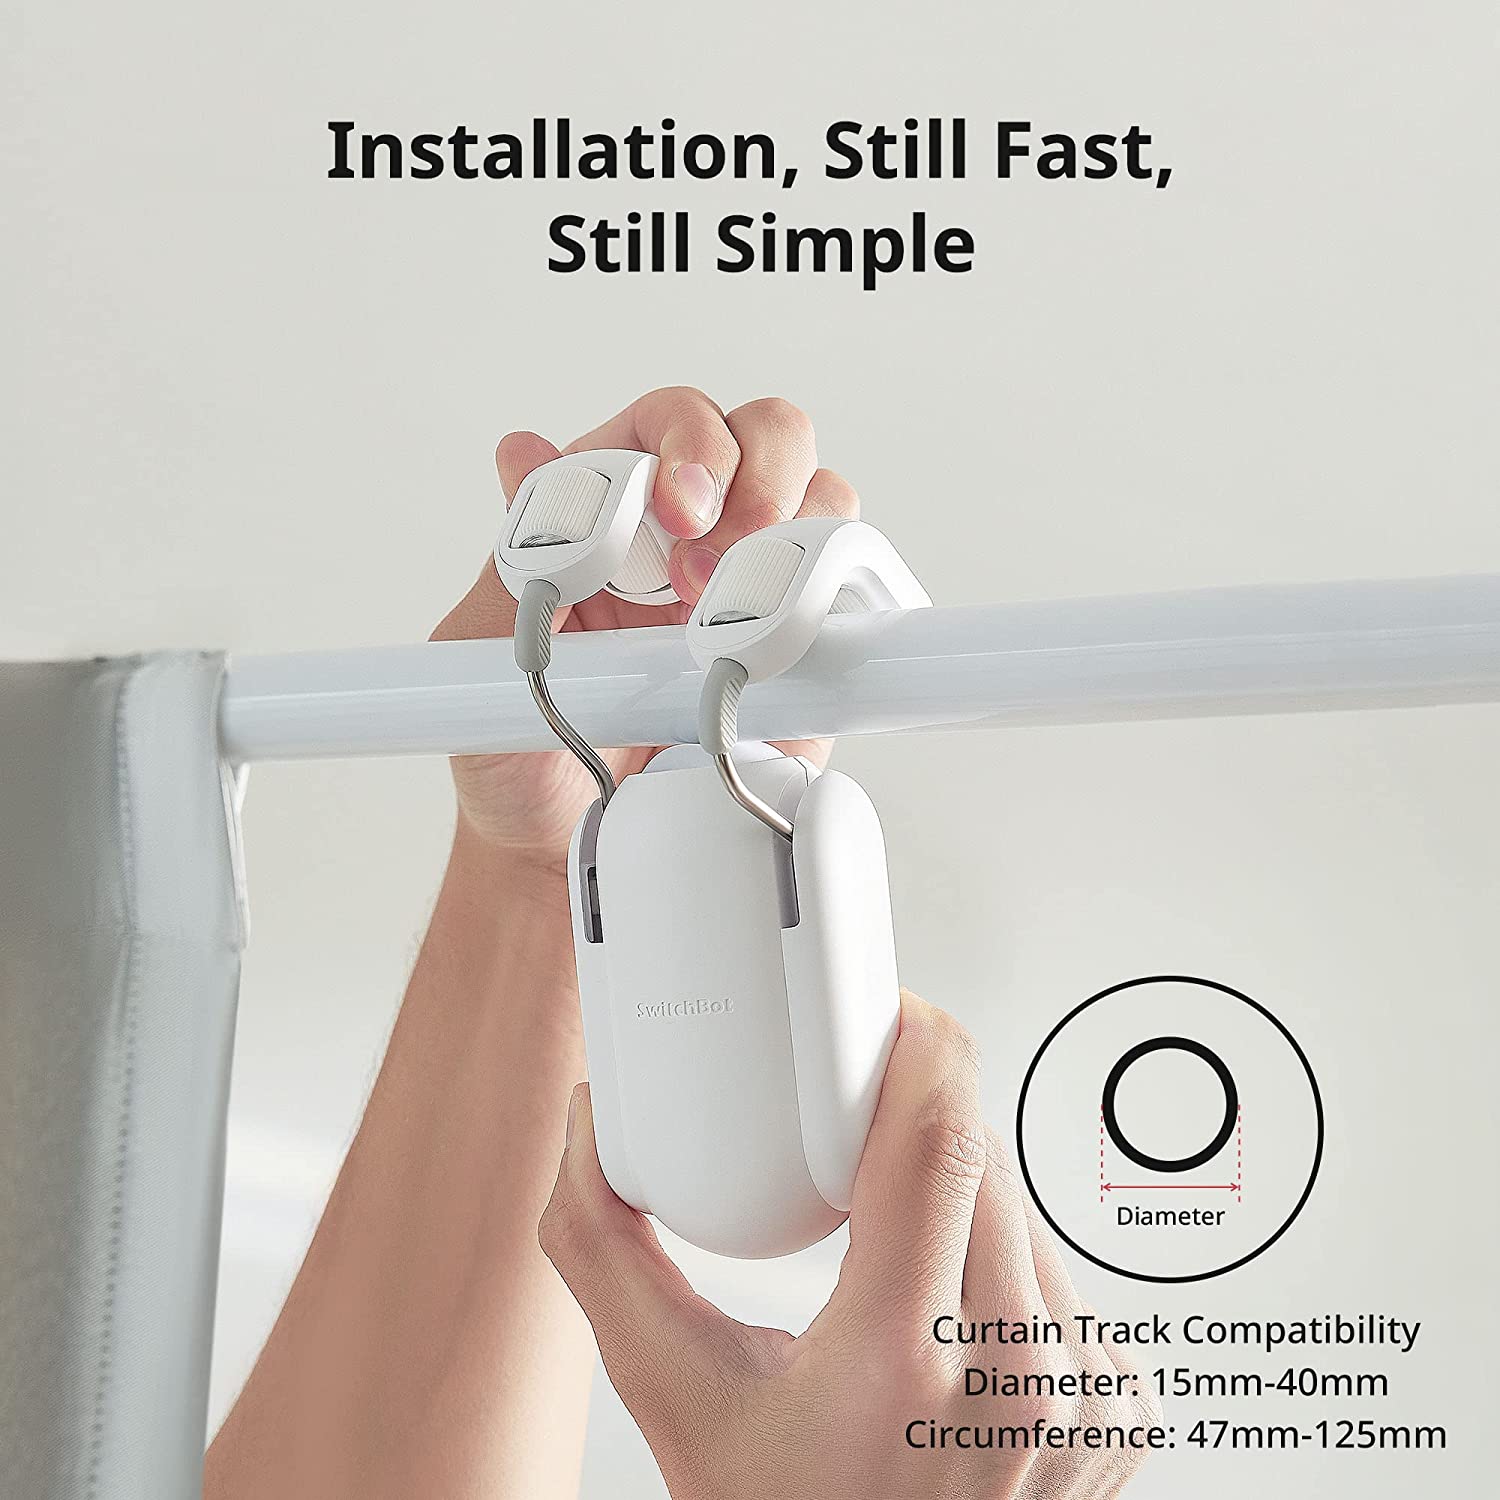 SwitchBot Curtain (Rod 2) Combo | Smart Electric Motor - Wireless App Automate Timer Control with SwitchBot Hub Mini to Make it Compatible with Alexa, Google Home, IFTTT - Bundle